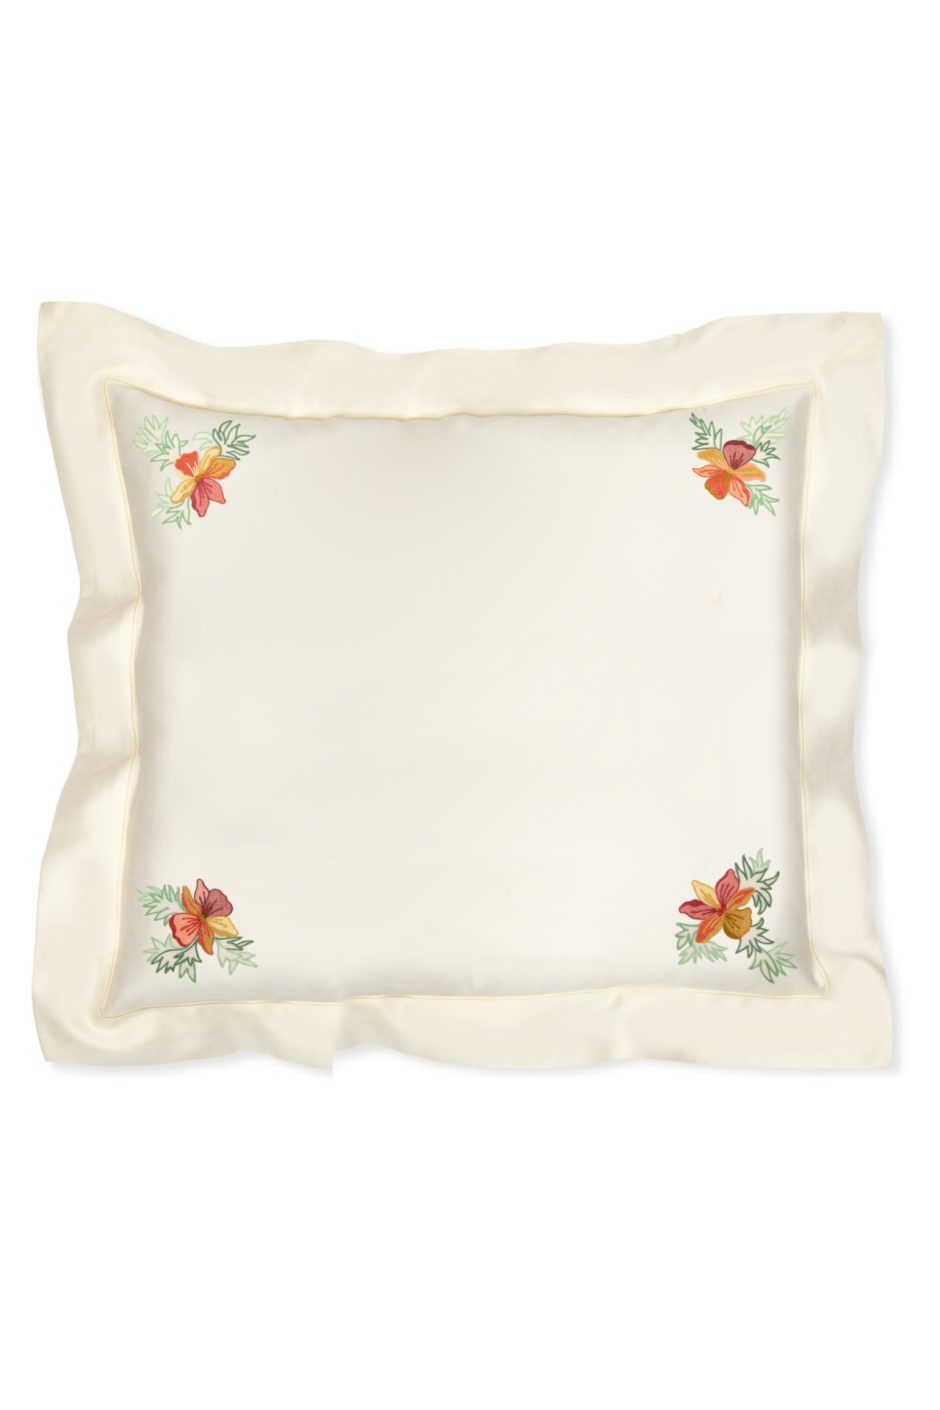 EMBROIDERED ORCHID SQUARE PILLOW CASE